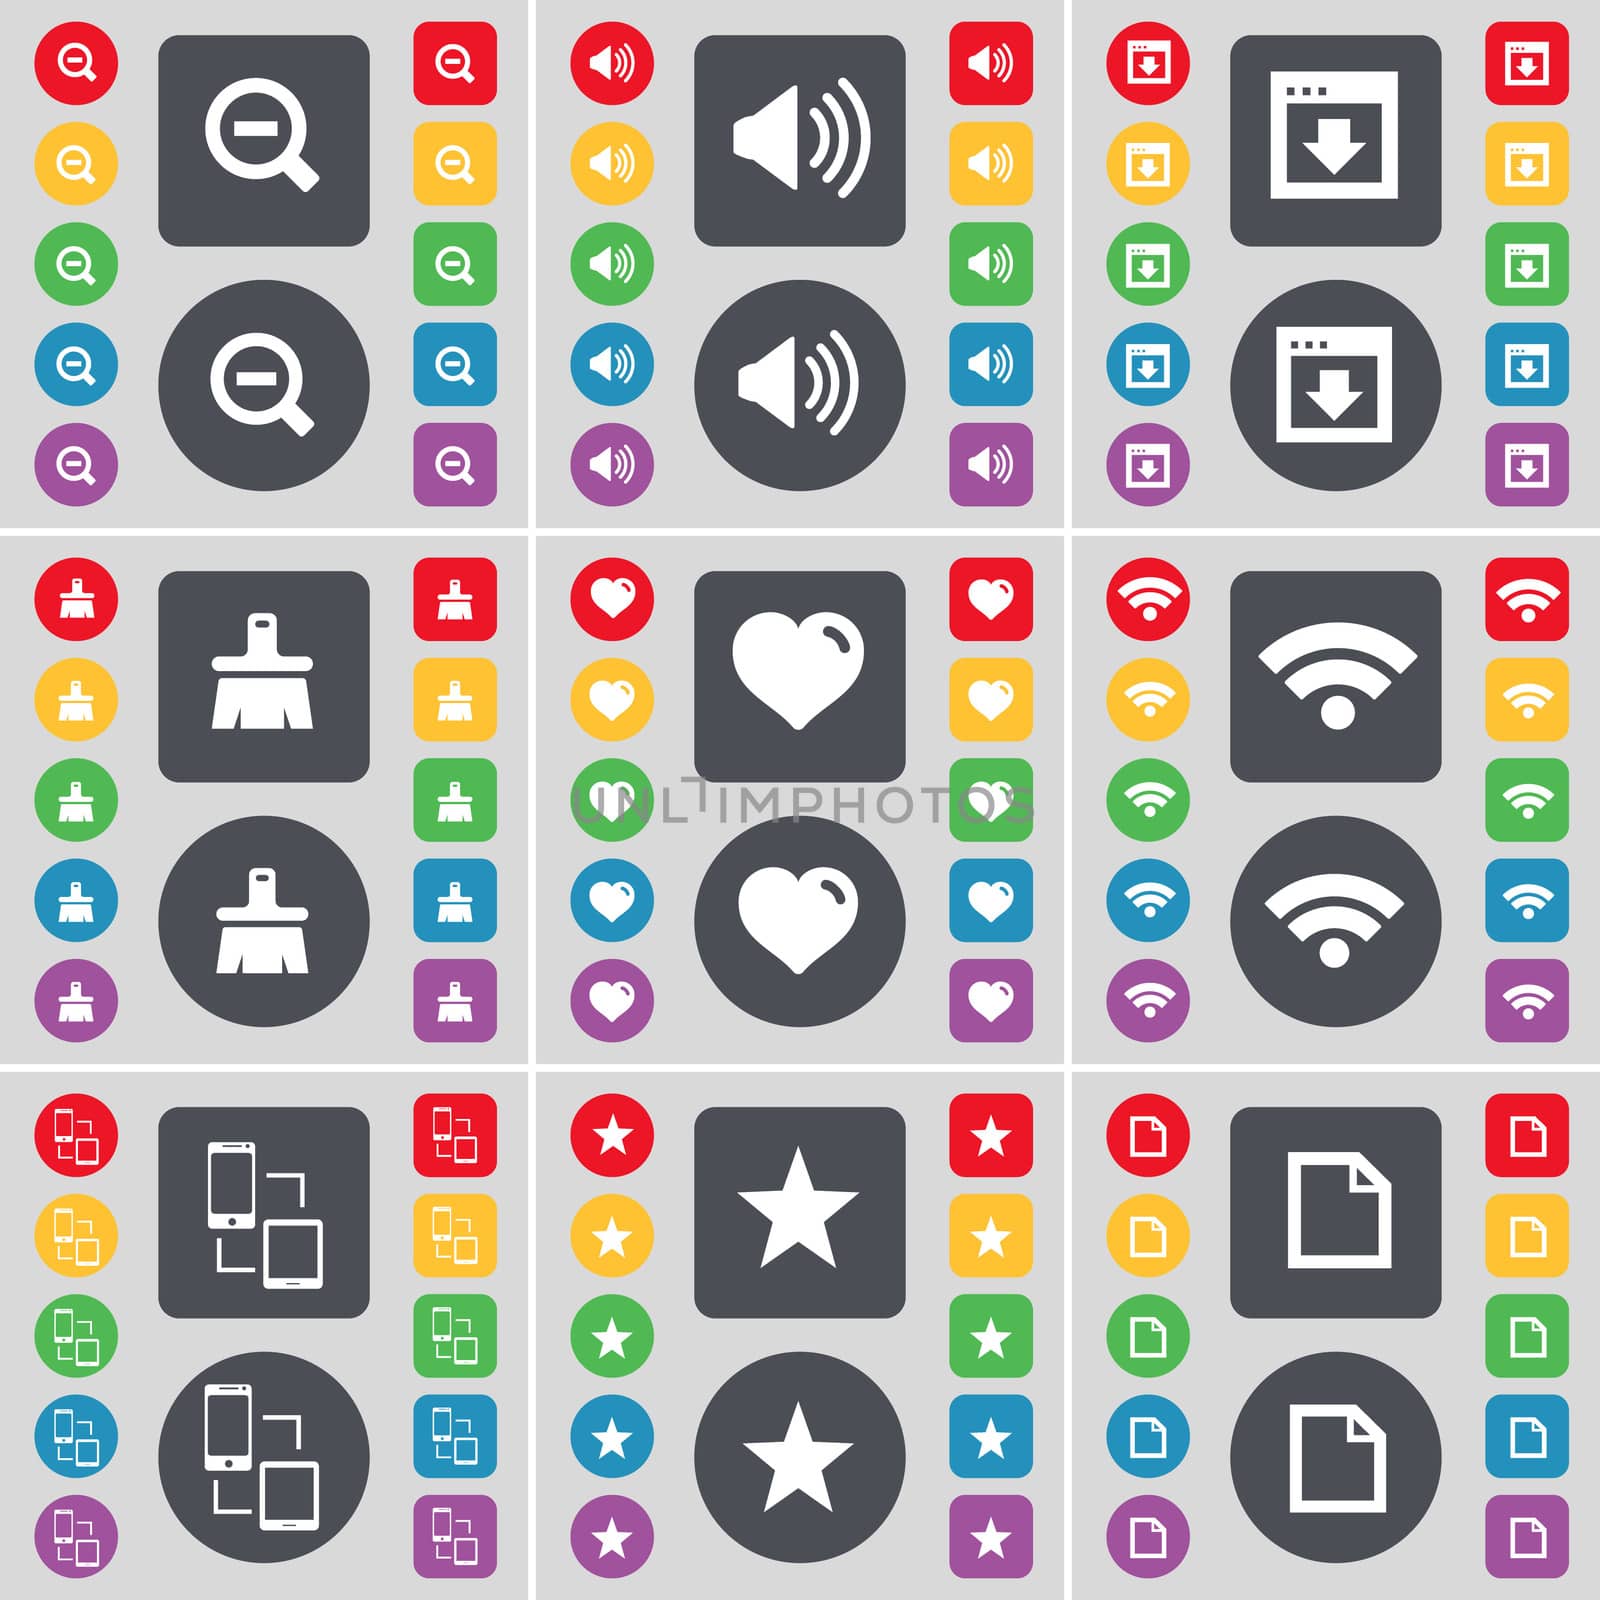 Minus, Sound, Window, Brush, Heart, Wi-Fi, Connection, Star, File icon symbol. A large set of flat, colored buttons for your design.  by serhii_lohvyniuk